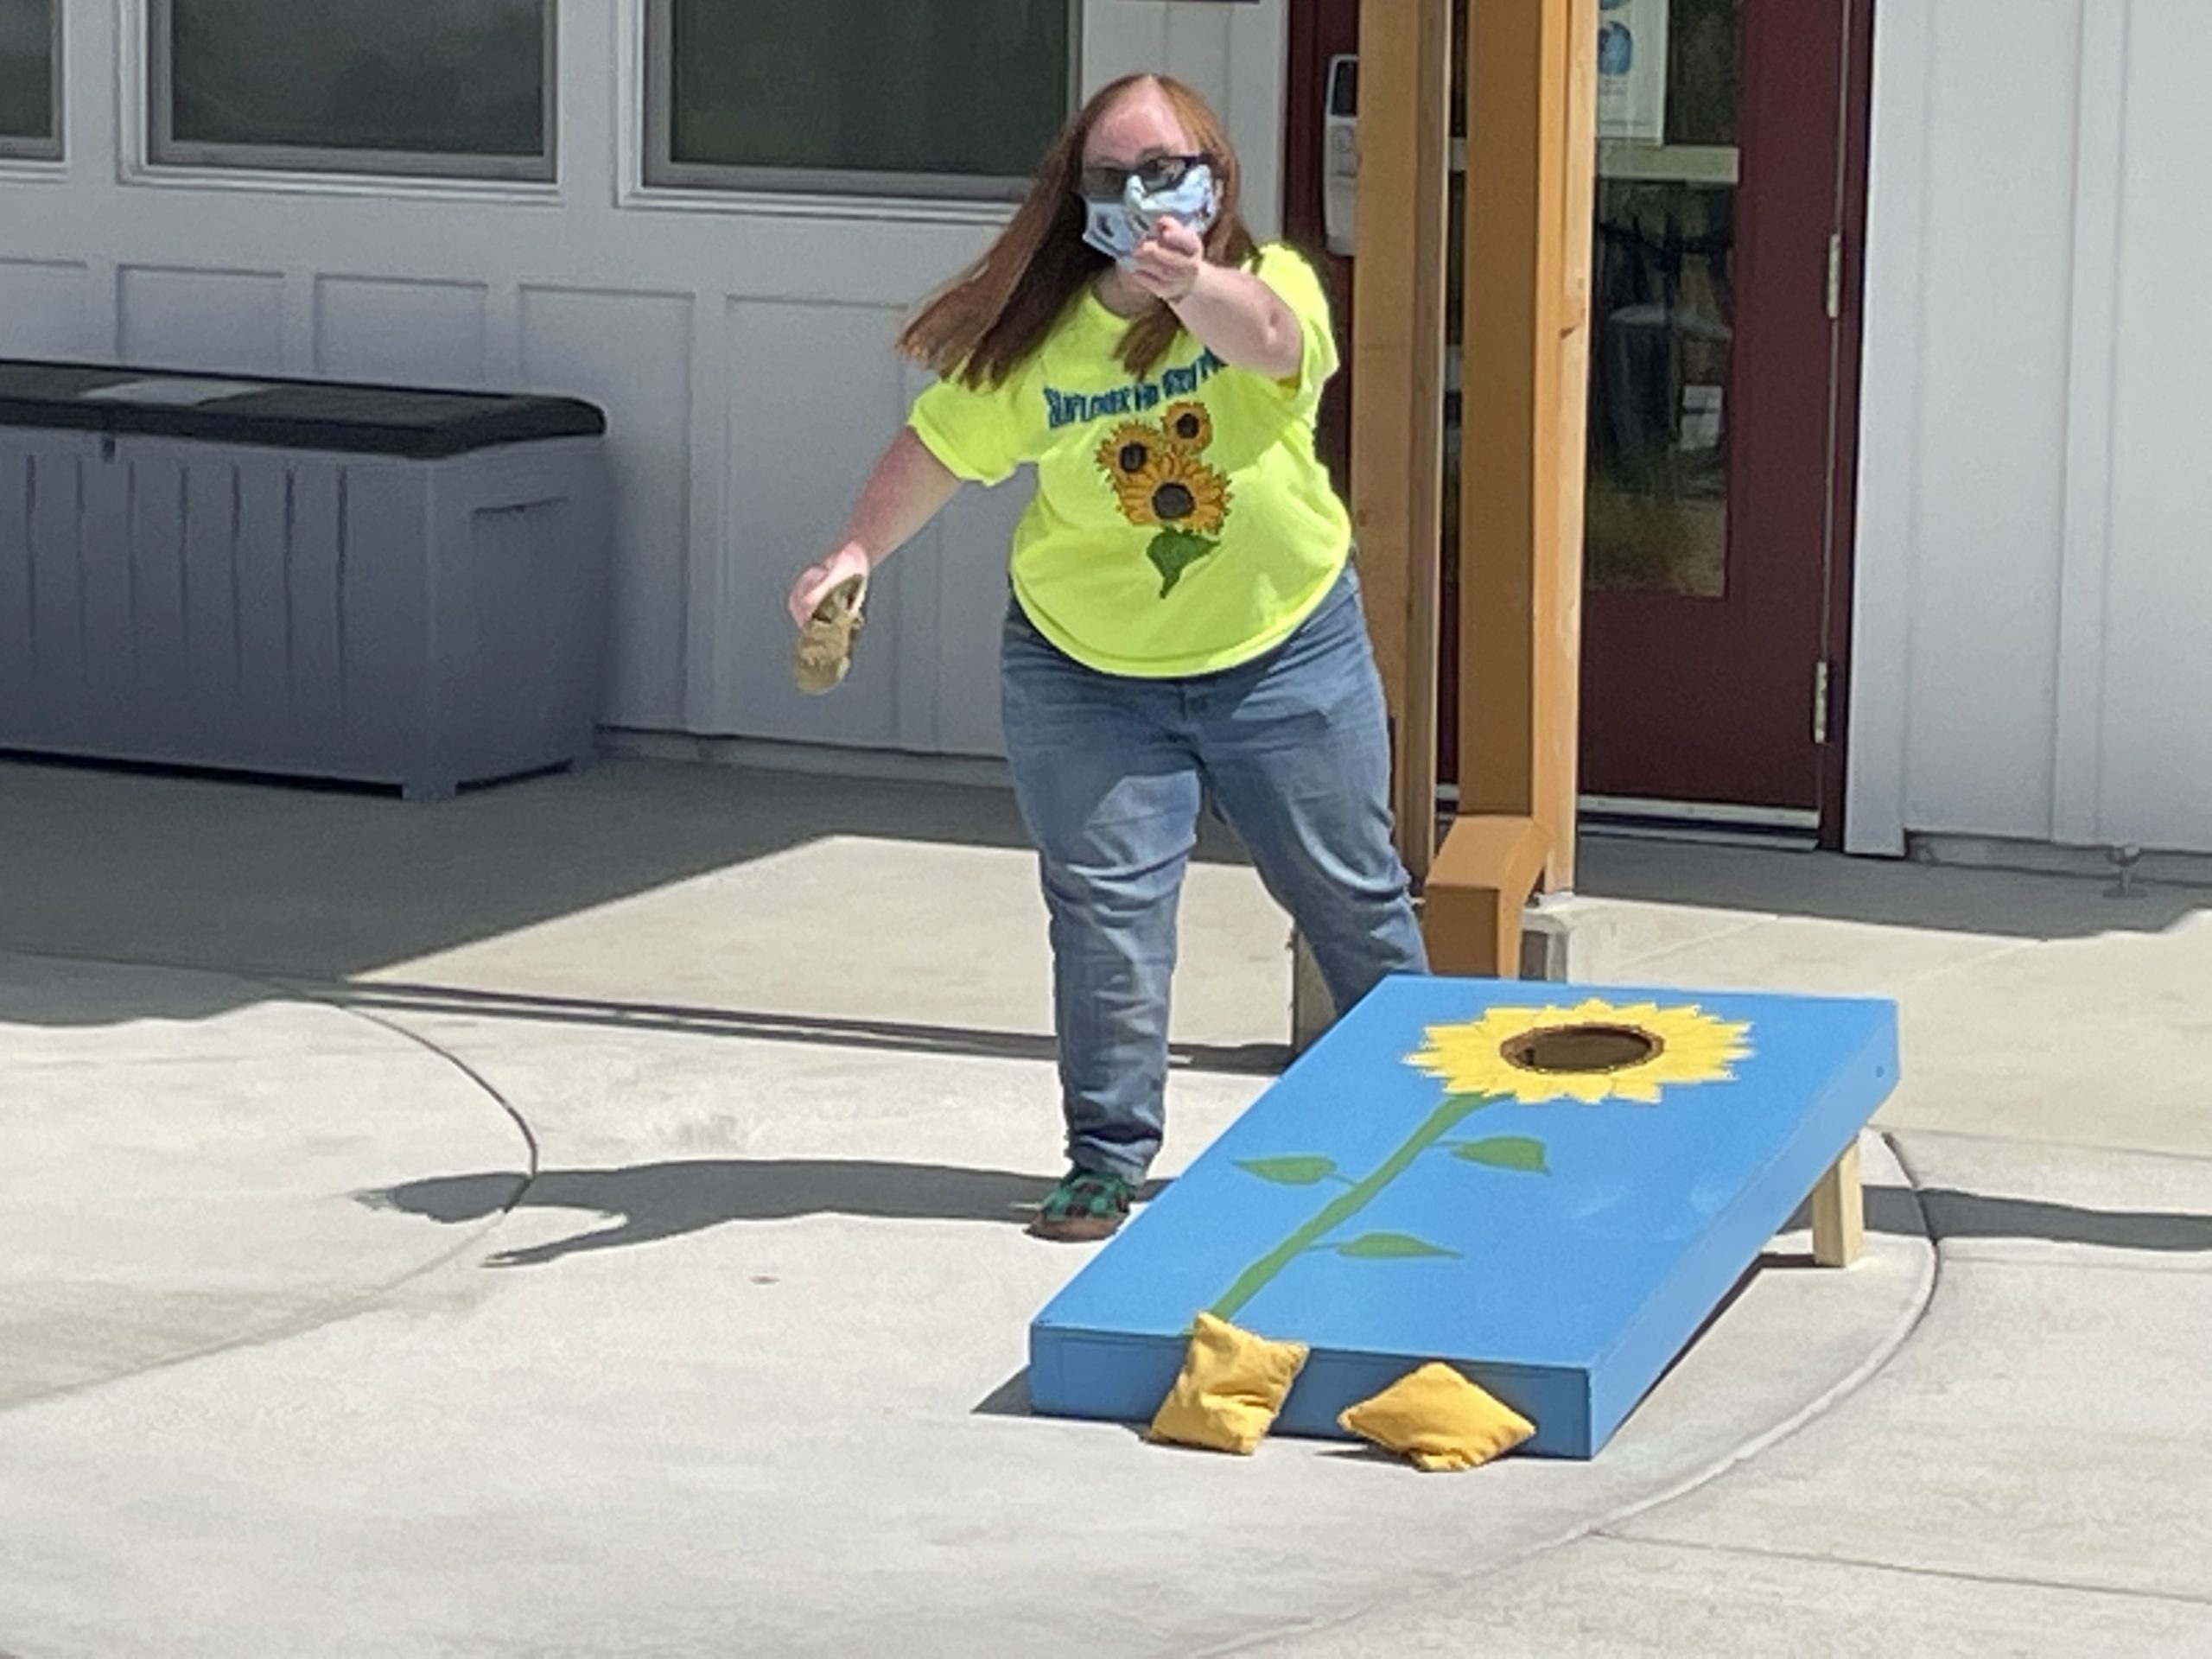 Lauren playing corn hole. Throwing a corn hole bag, standing next to a sunflower-themed corn hole.